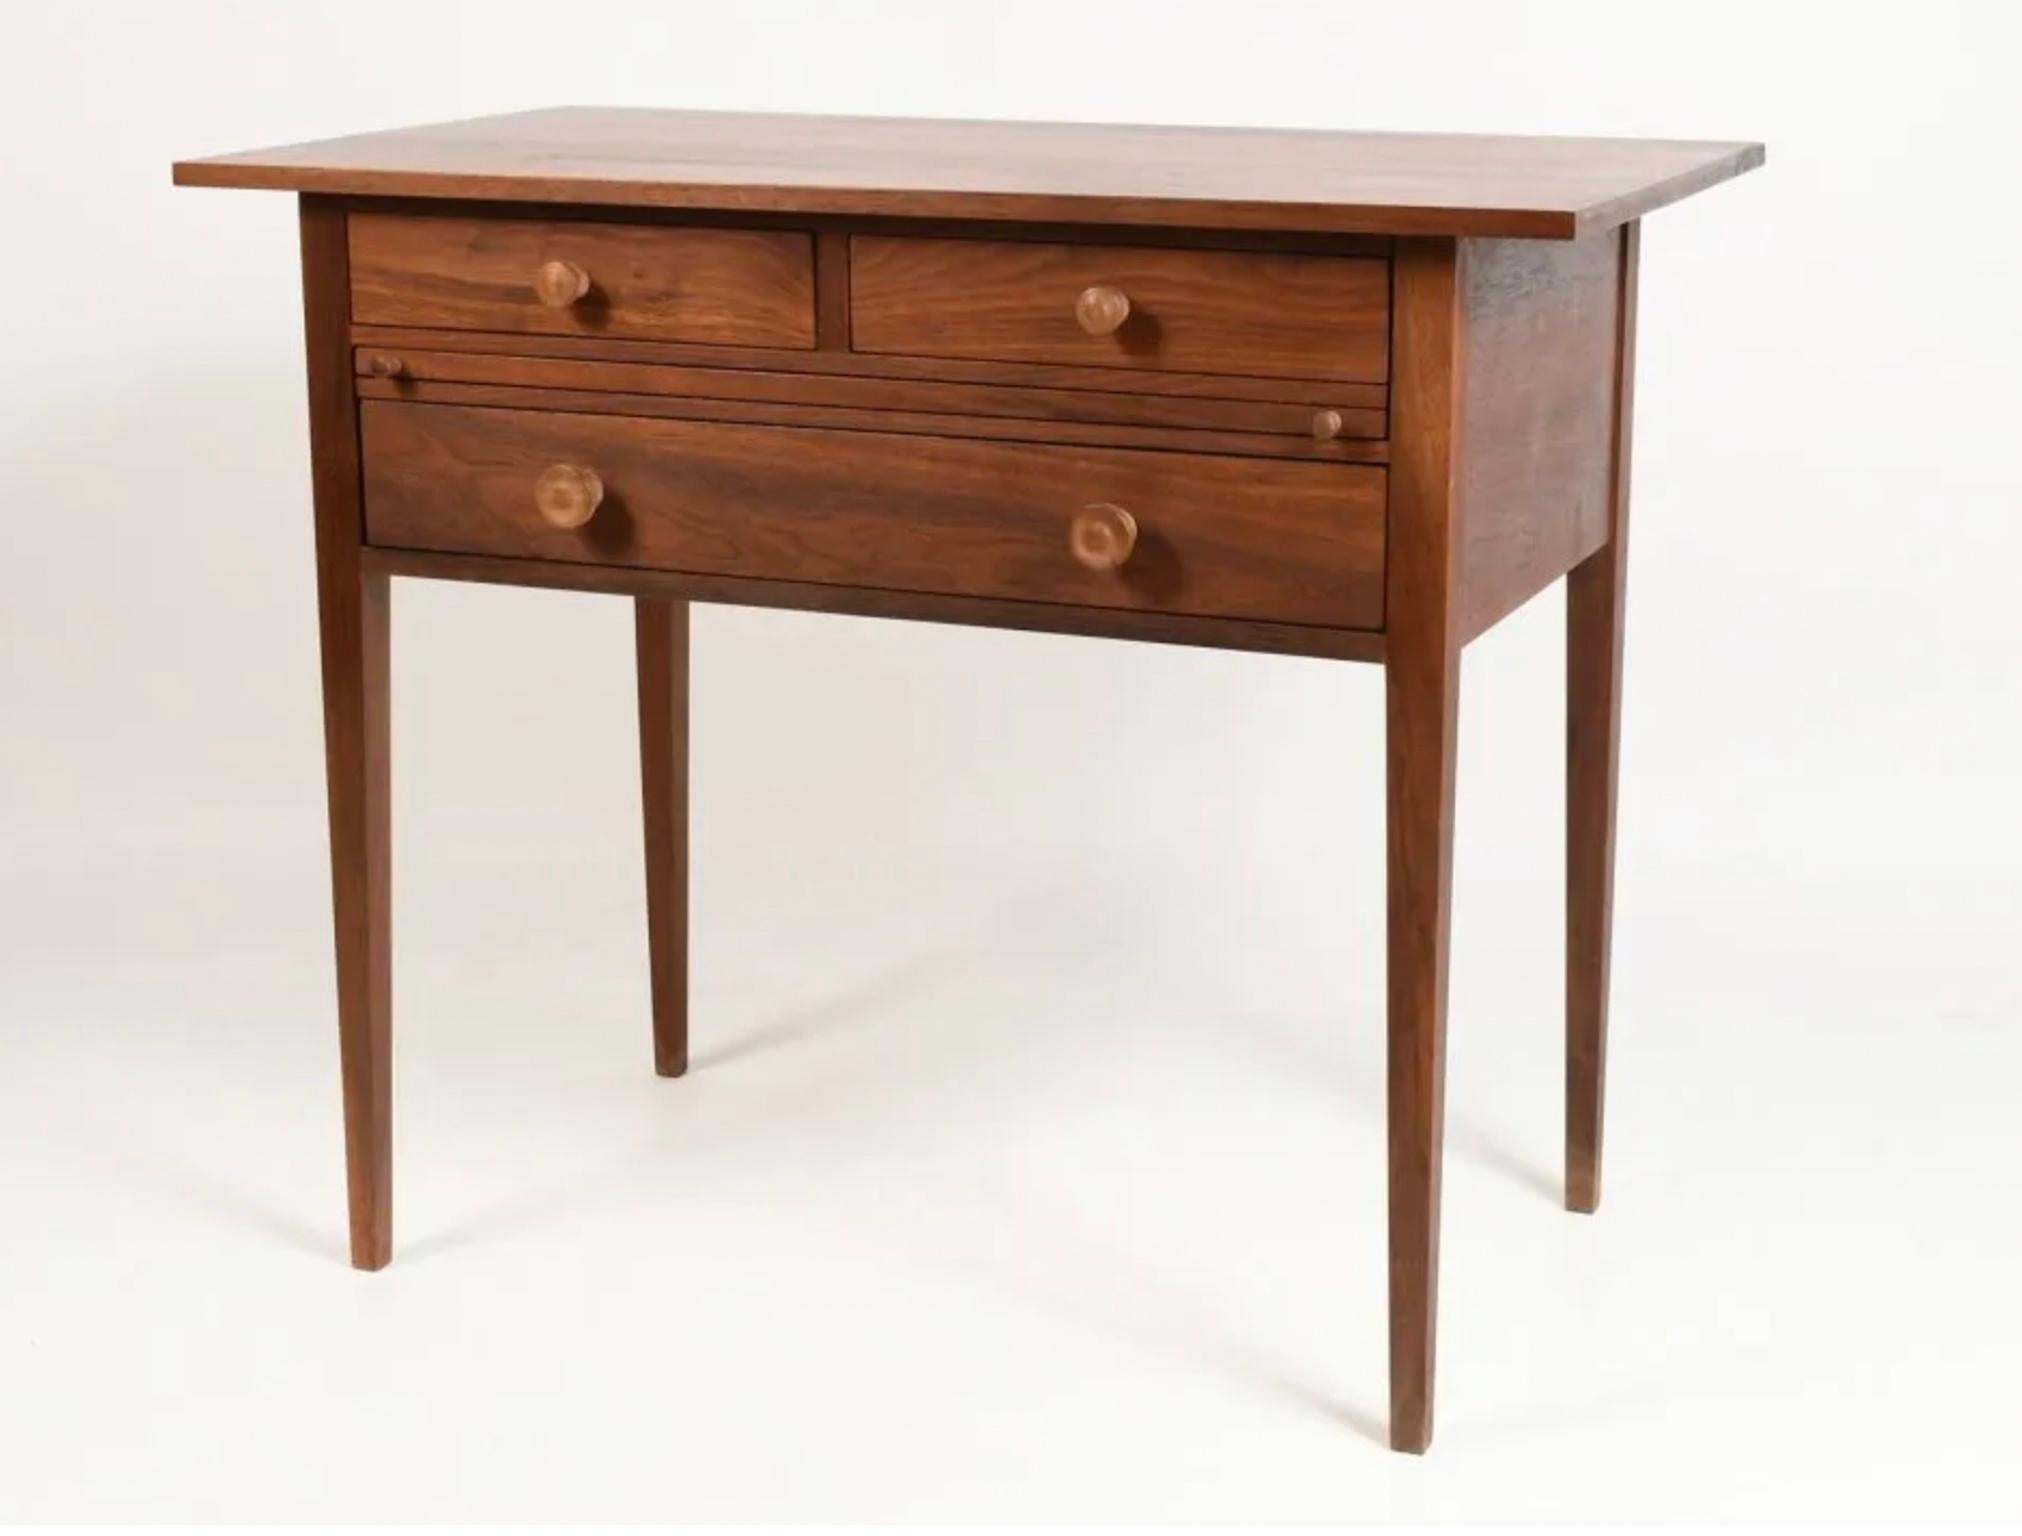 Unique American Studio Craft black walnut writing desk with tapered legs with two small drawers, a pull out surface, and a wide full-size drawer. All expertly crafted using fine woodworking joinery techniques. Has continuous walnut grain across the